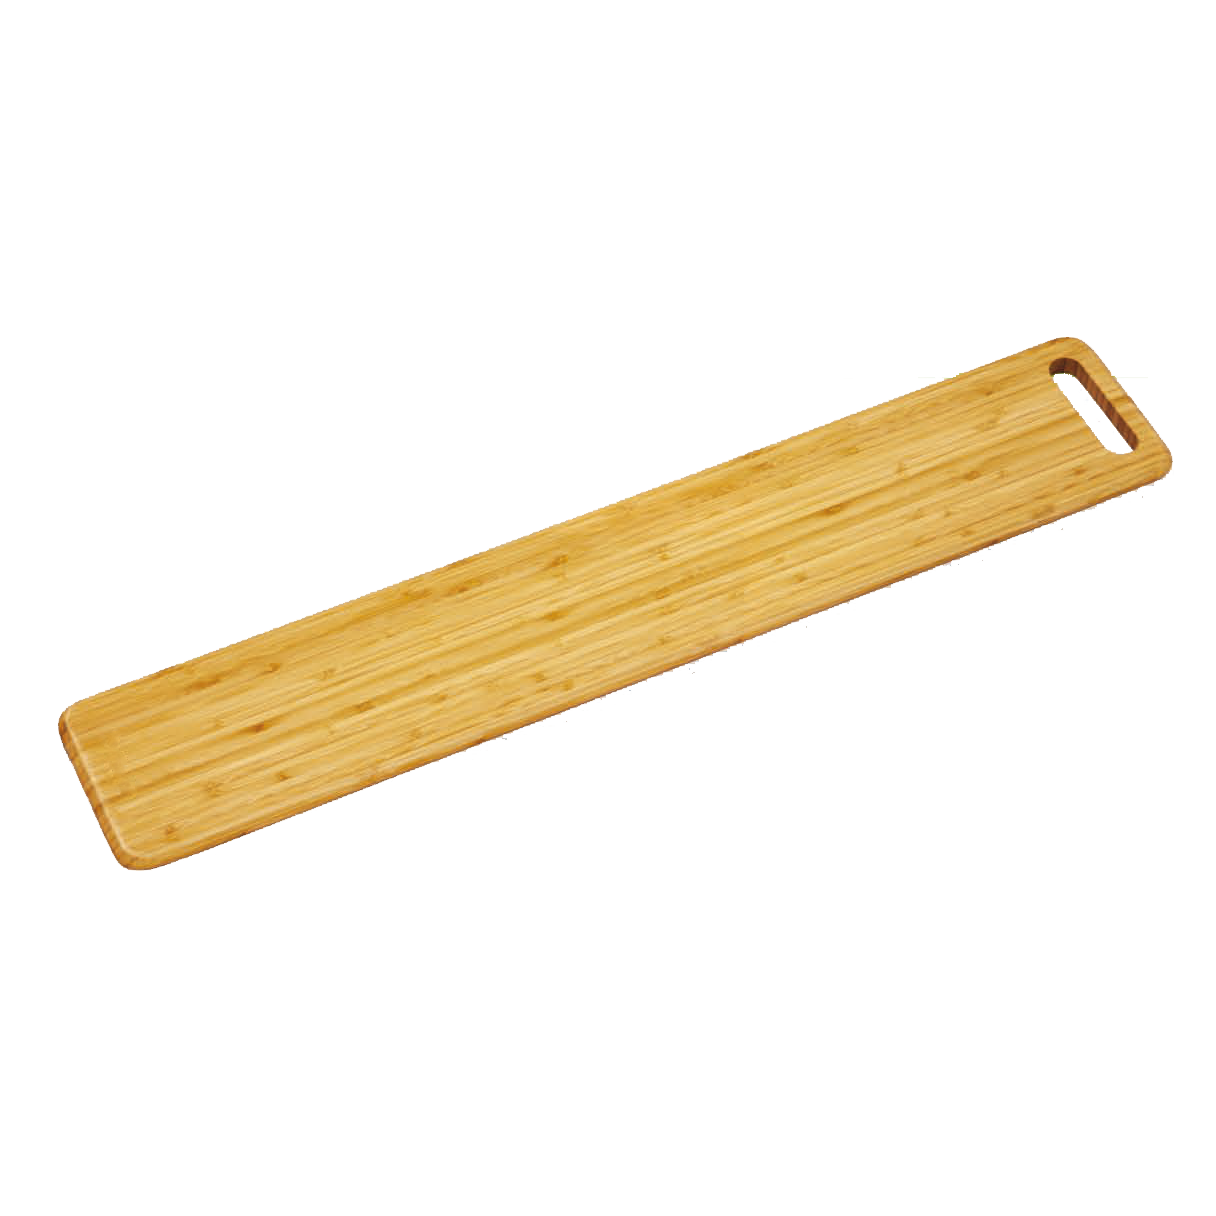 SET OF 2 LONG SERVING BOARDS 31.5" X 5.9" | 80 X 15 CM